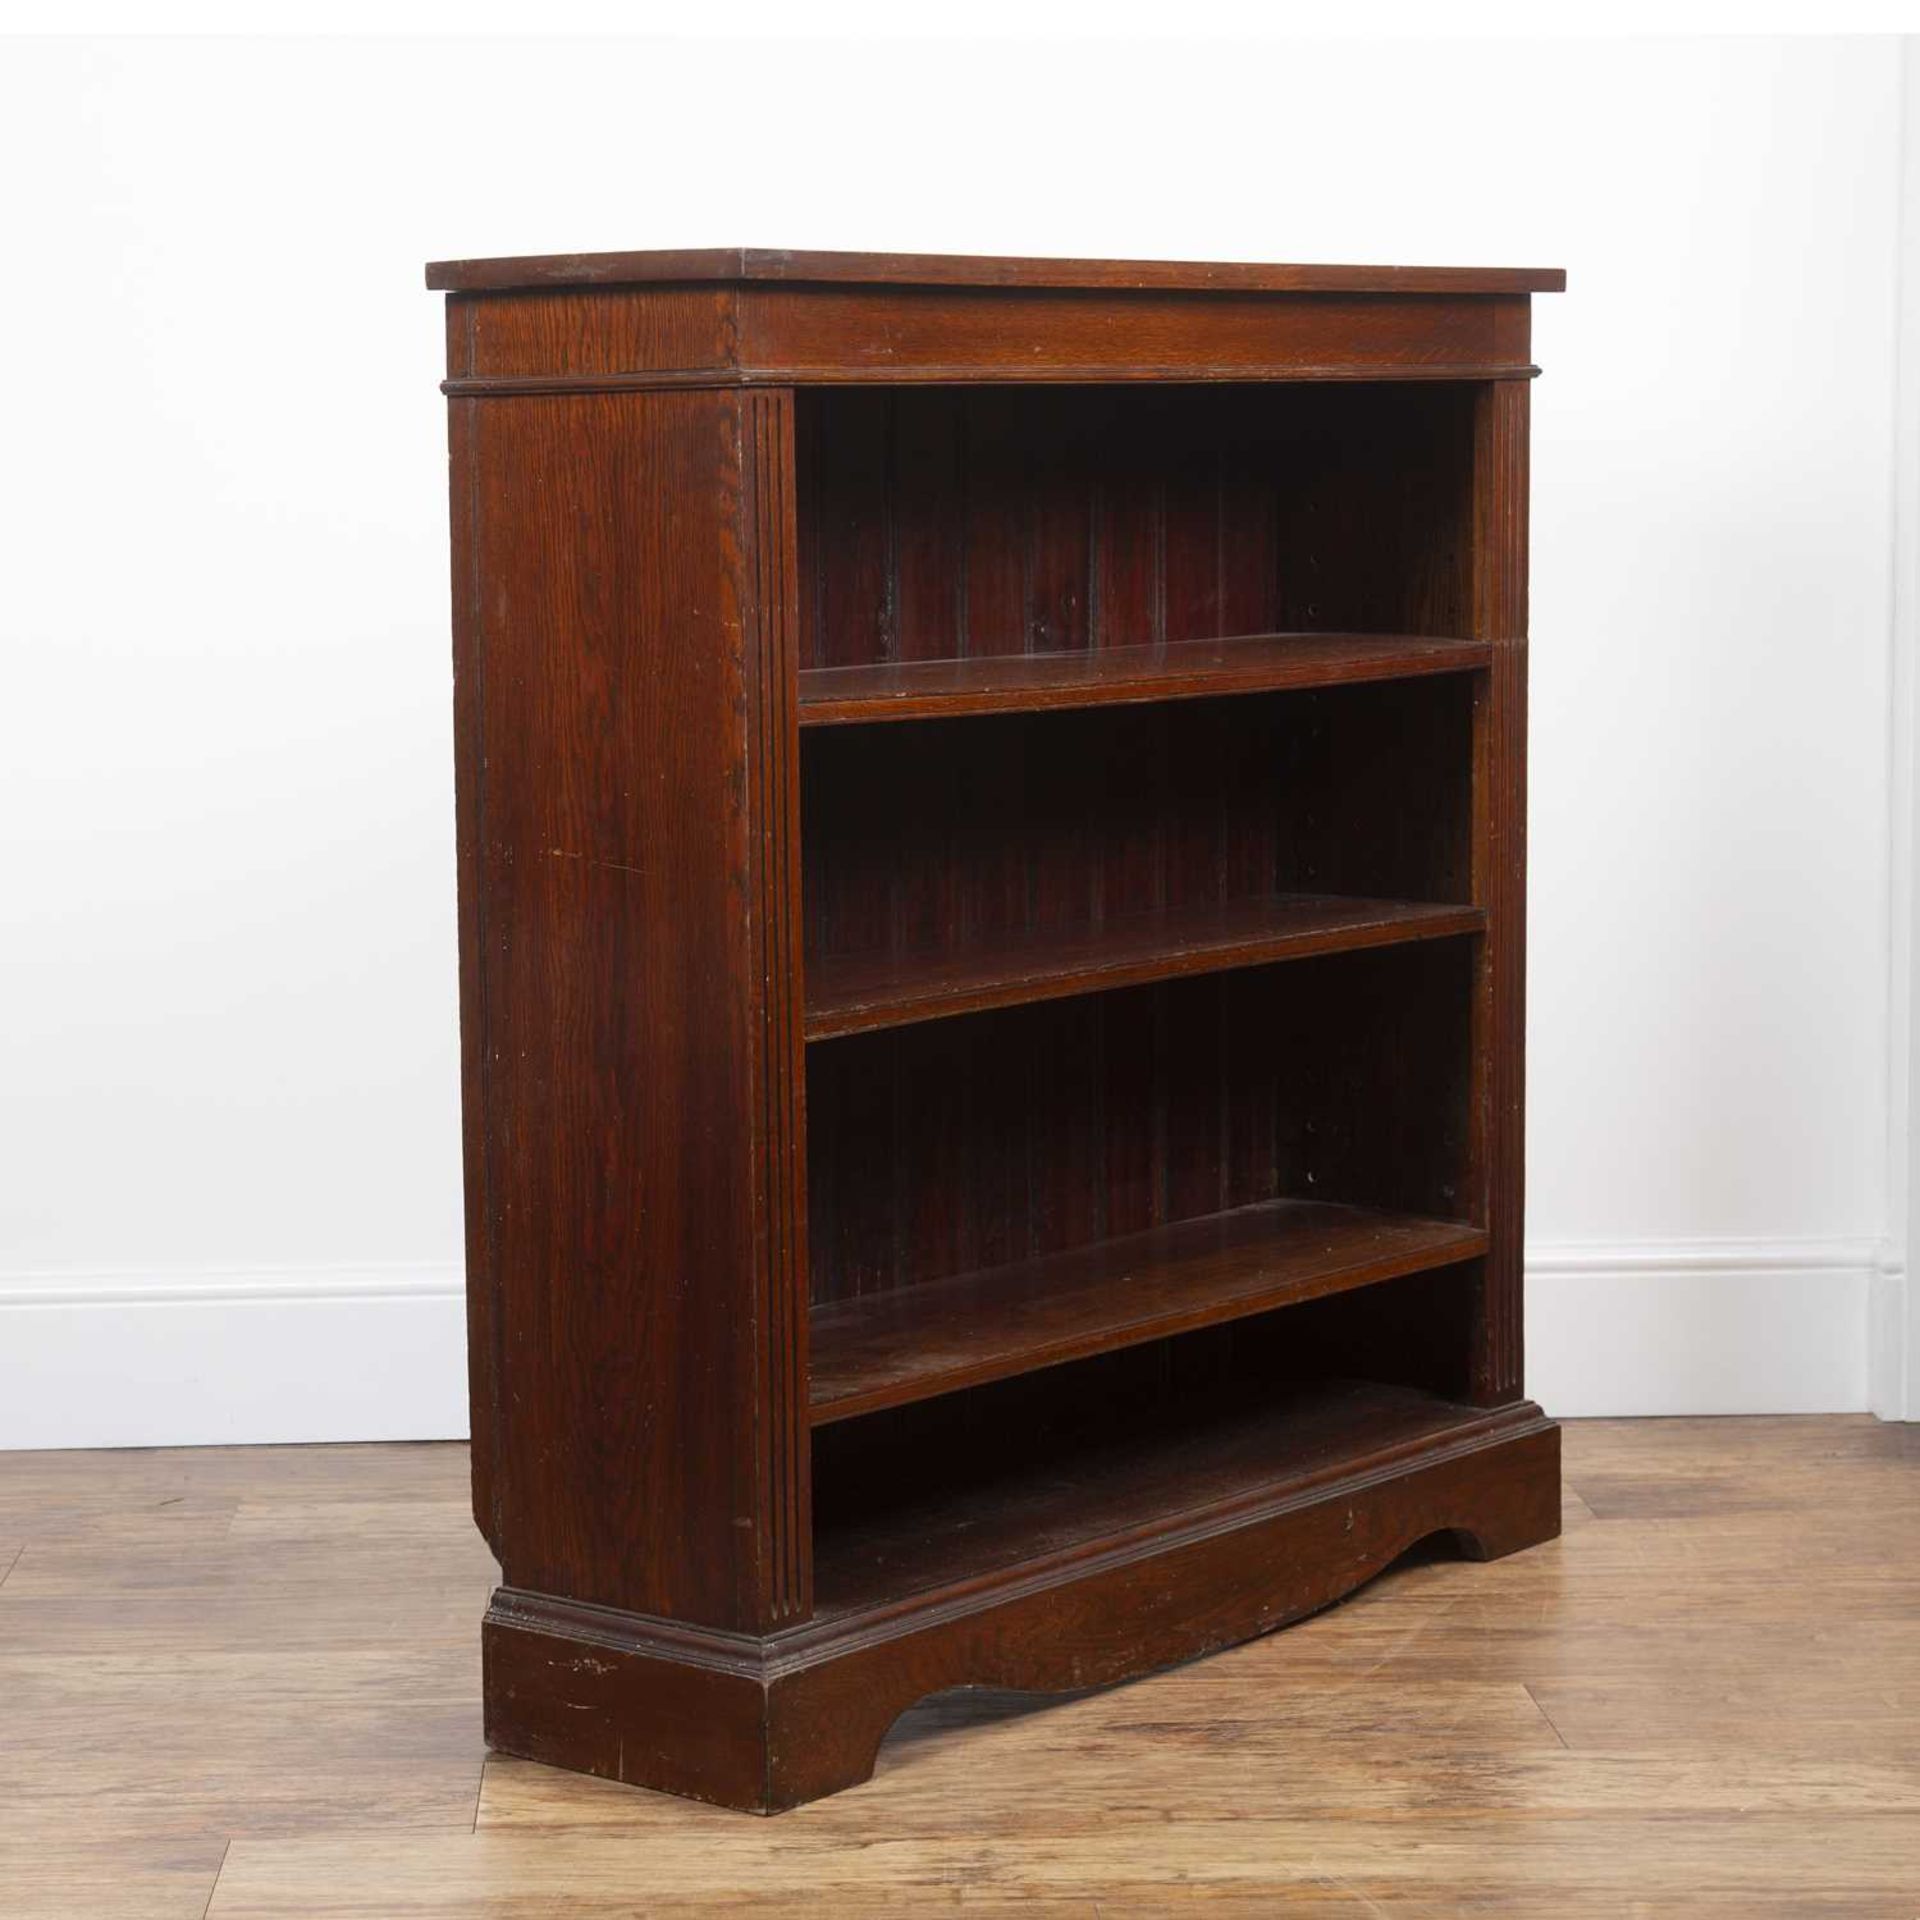 Oak open front bookcase with three height adjustable shelves flanked by reeded effect columns on - Image 2 of 4